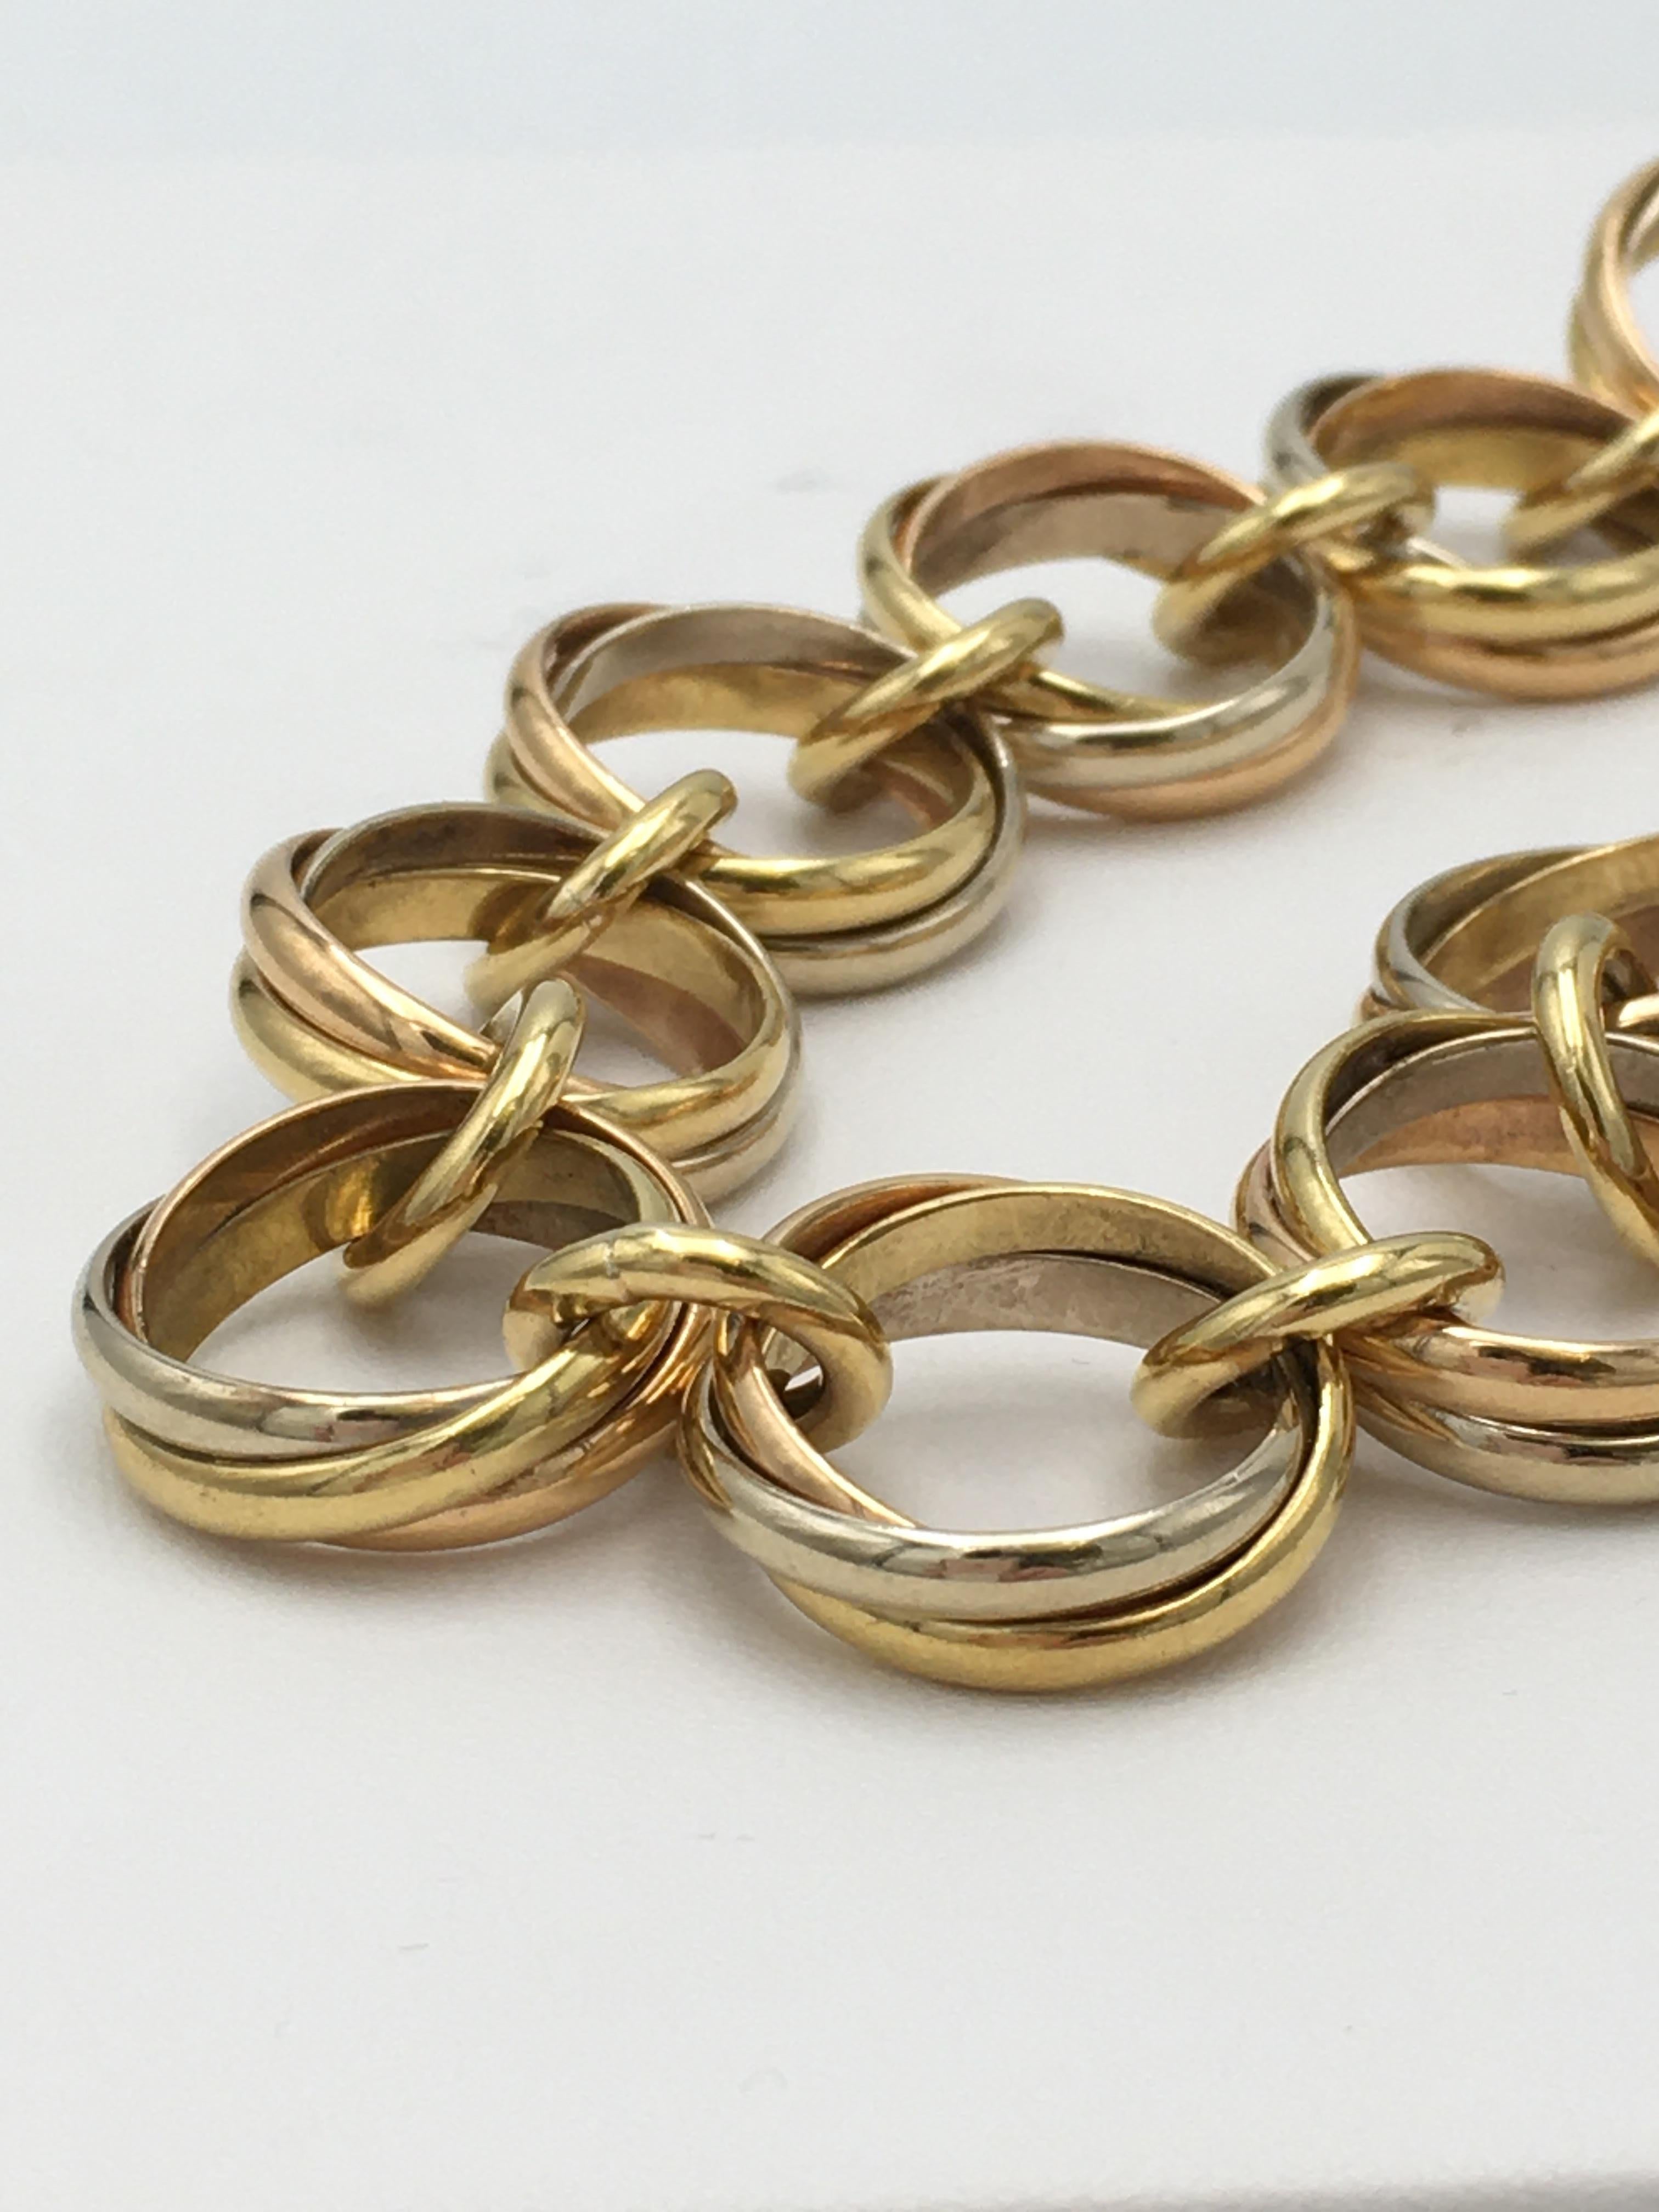 Authentic Cartier 'Trinity' link bracelet comprised of interlocking rings of 18 karat yellow, rose, and white gold. Signed Cartier, 750, Cartier 1991, with serial number. The bracelet measures 7 3/4 inches in length. Not presented with original box